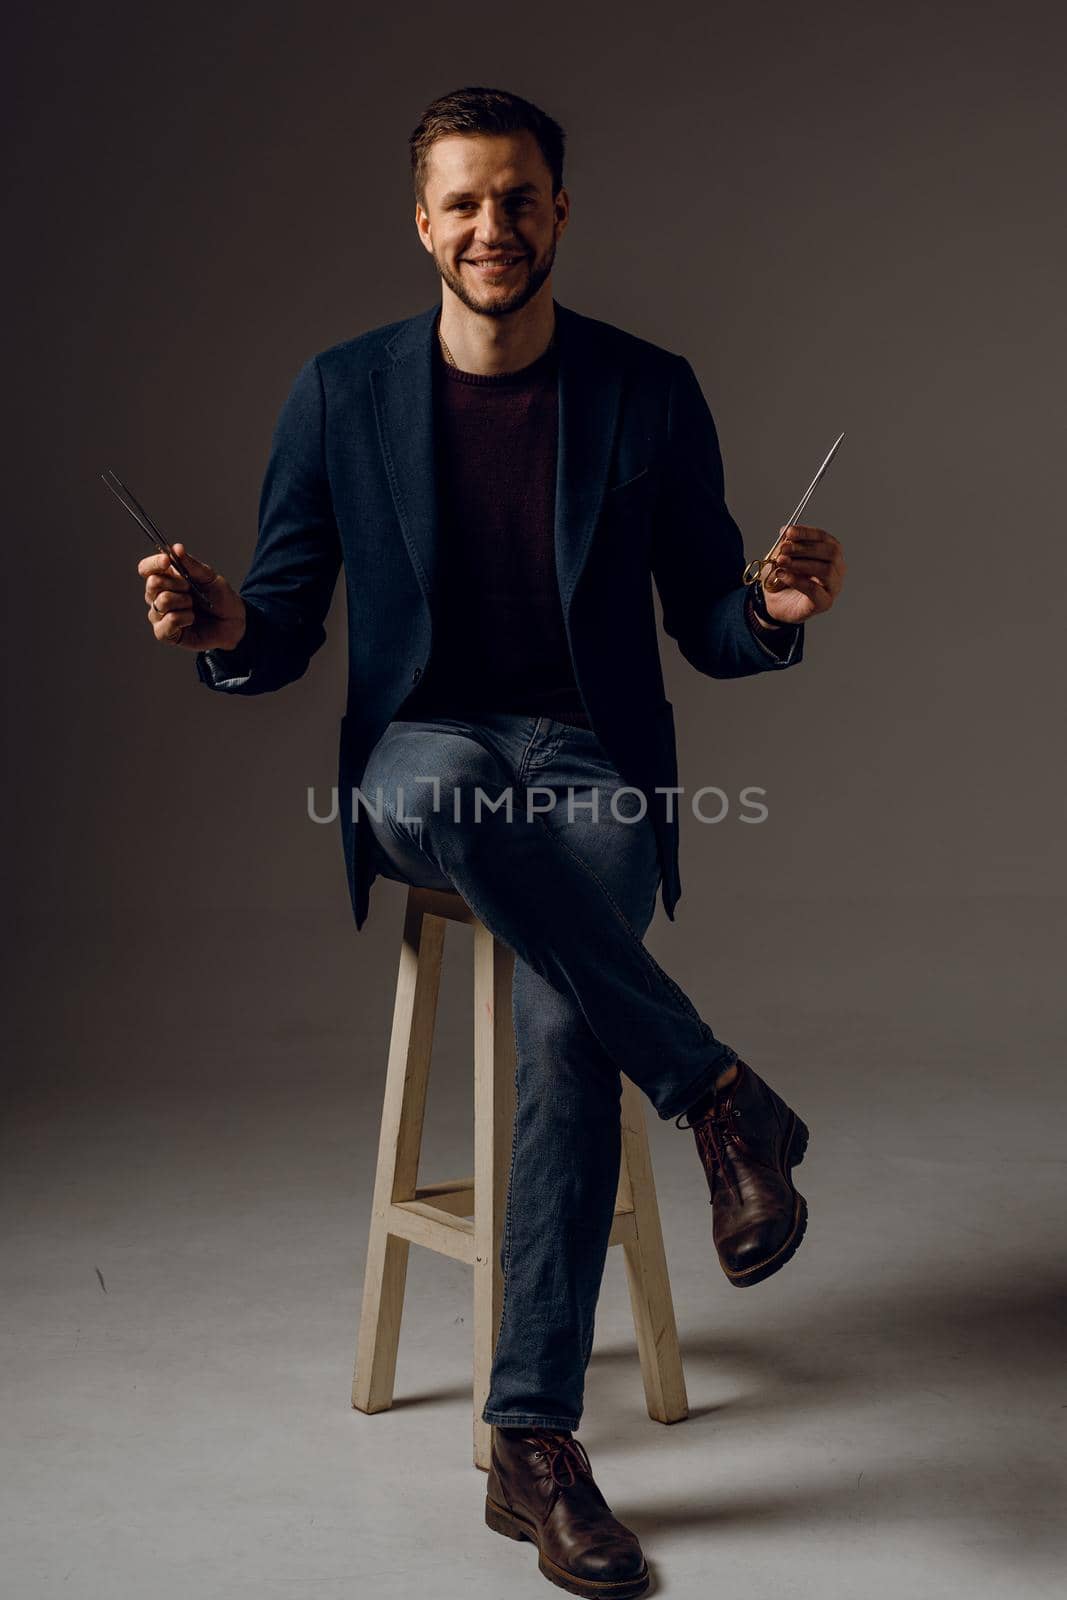 Handsome surgeon with needle holder and surgical knife weared casual suit in studio. Confident business man on dark background